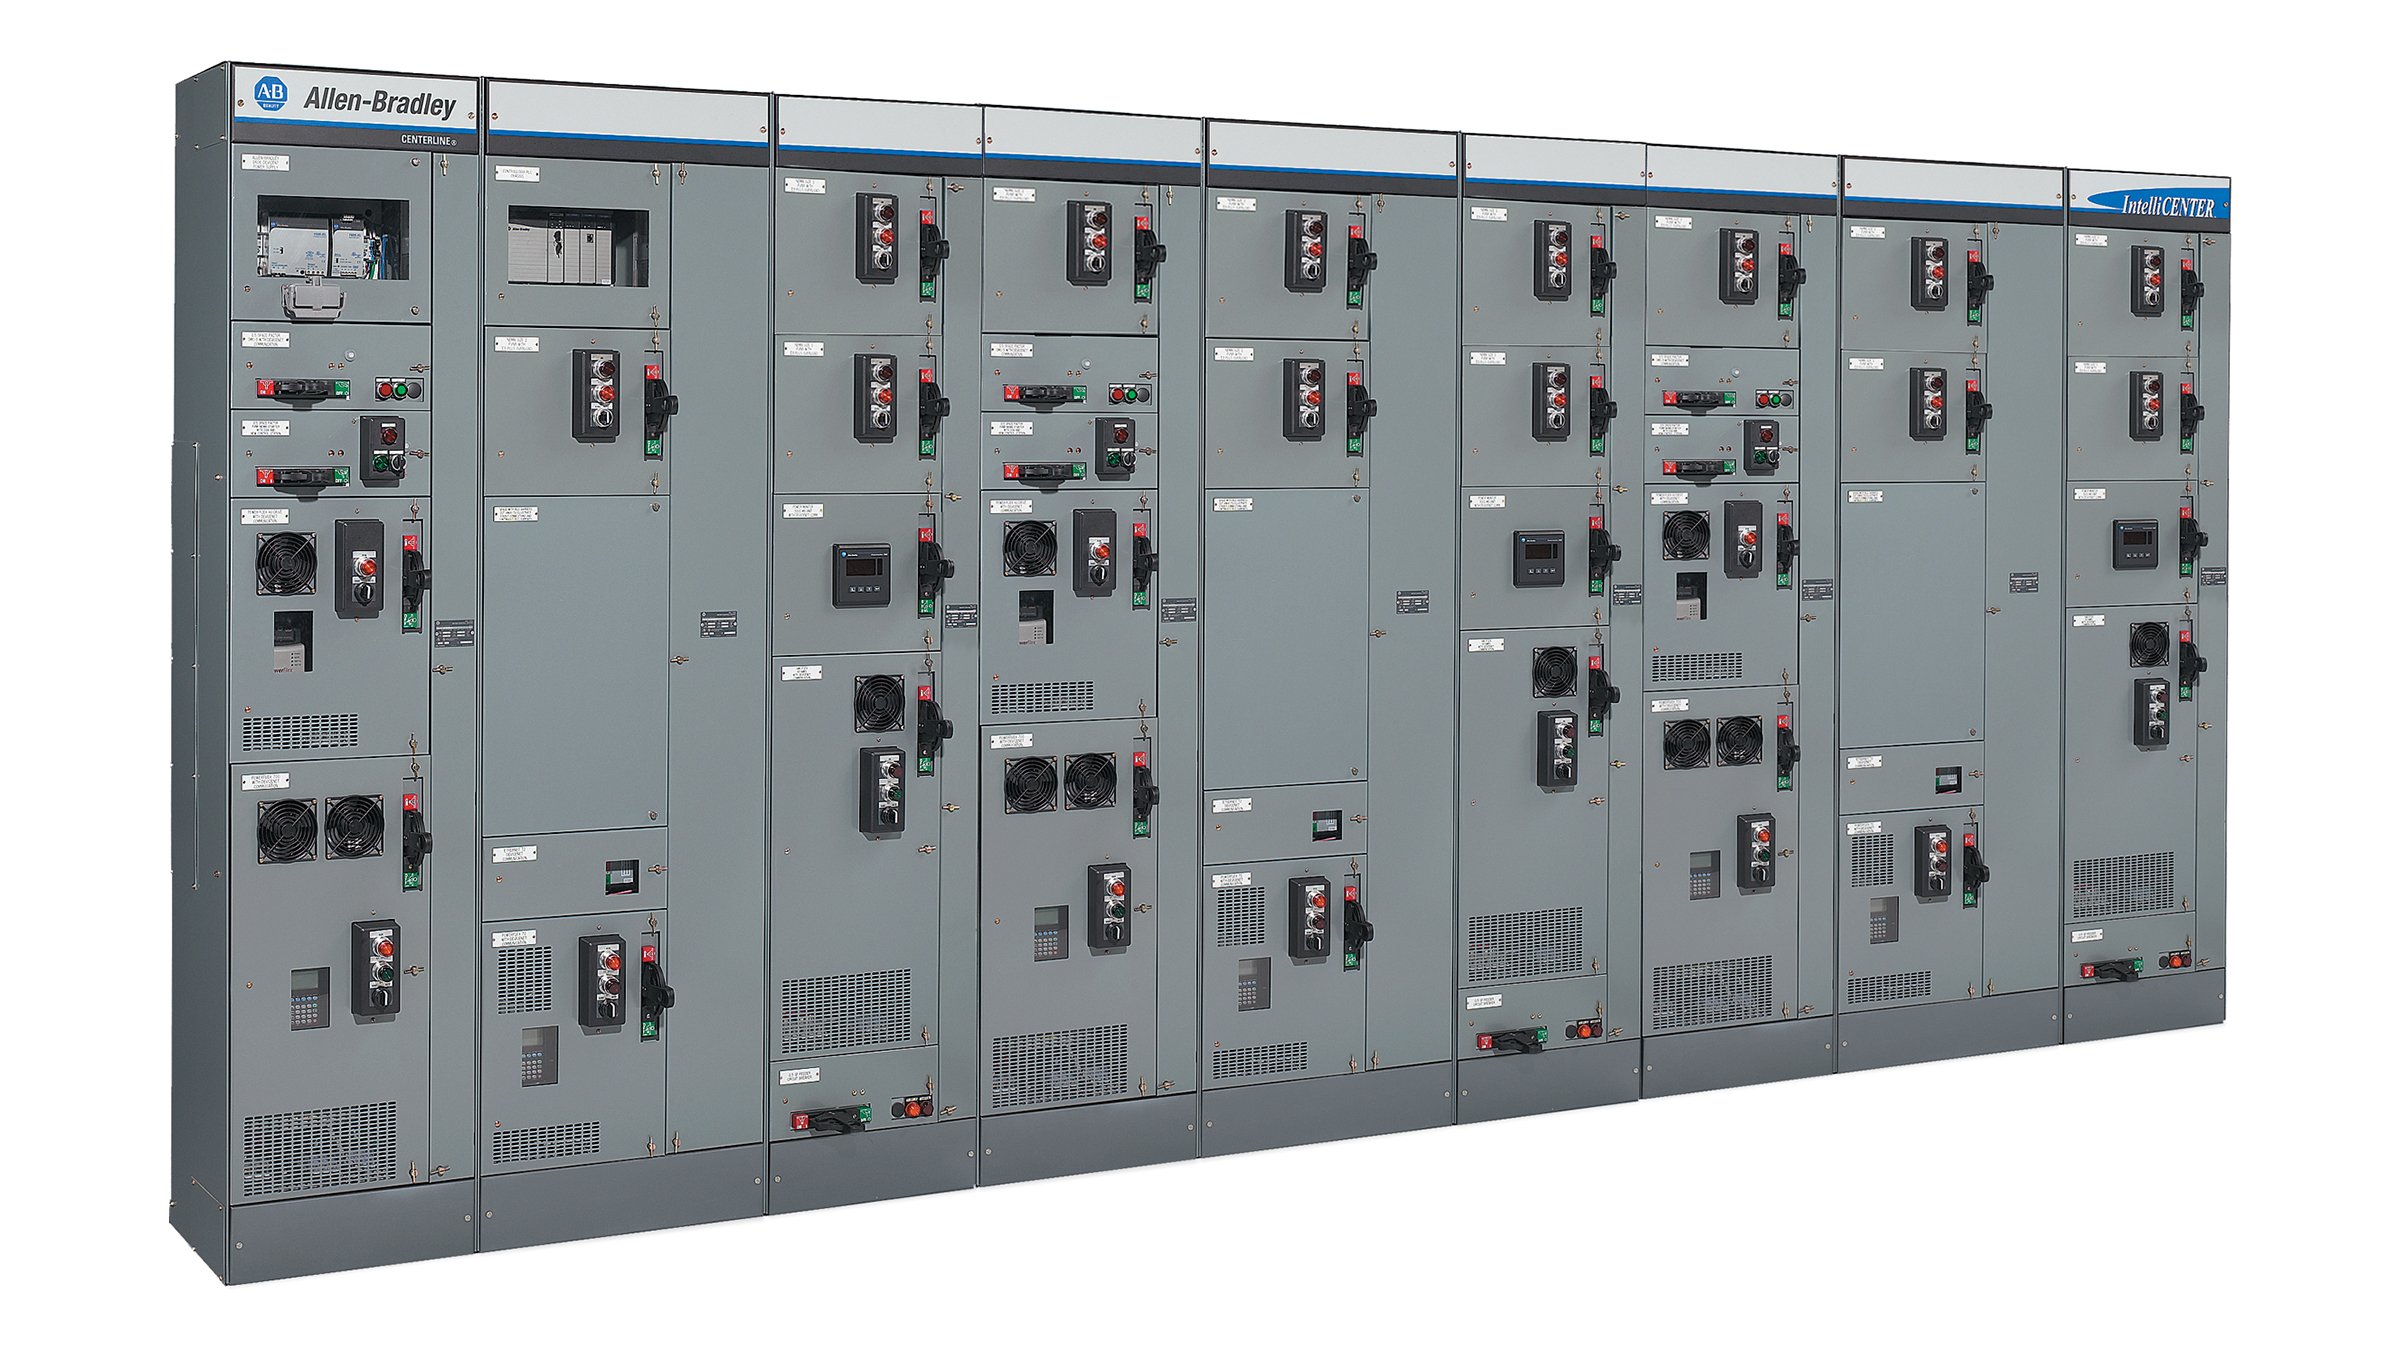 CENTERLINE 2100 motor control center with IntelliCENTER technology for industrial motor control in factories